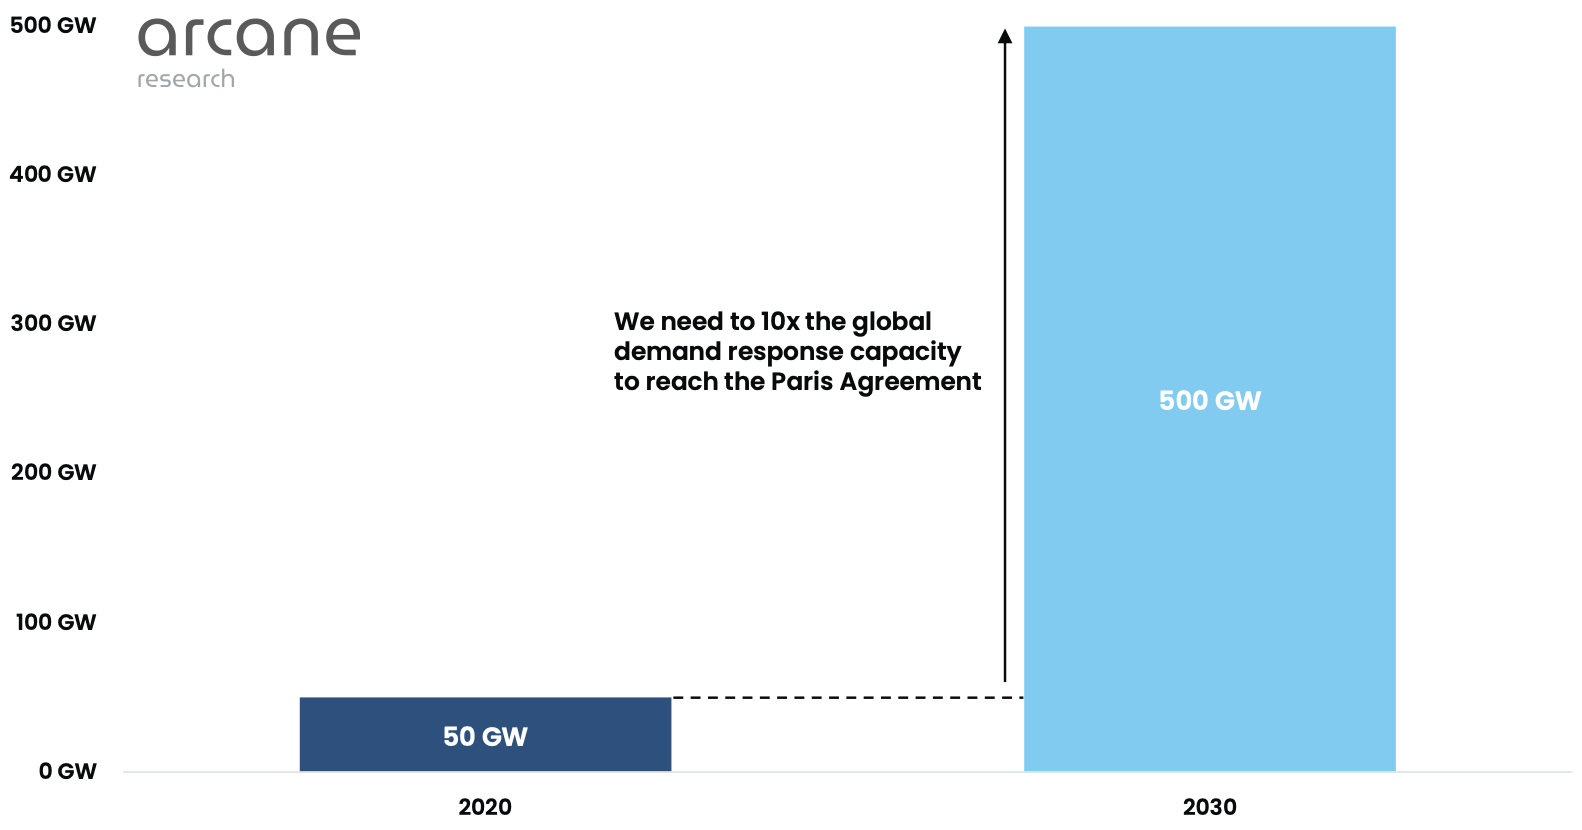 A 10 fold increase in demand response is needed by 2030 (Source: Arcane Research)